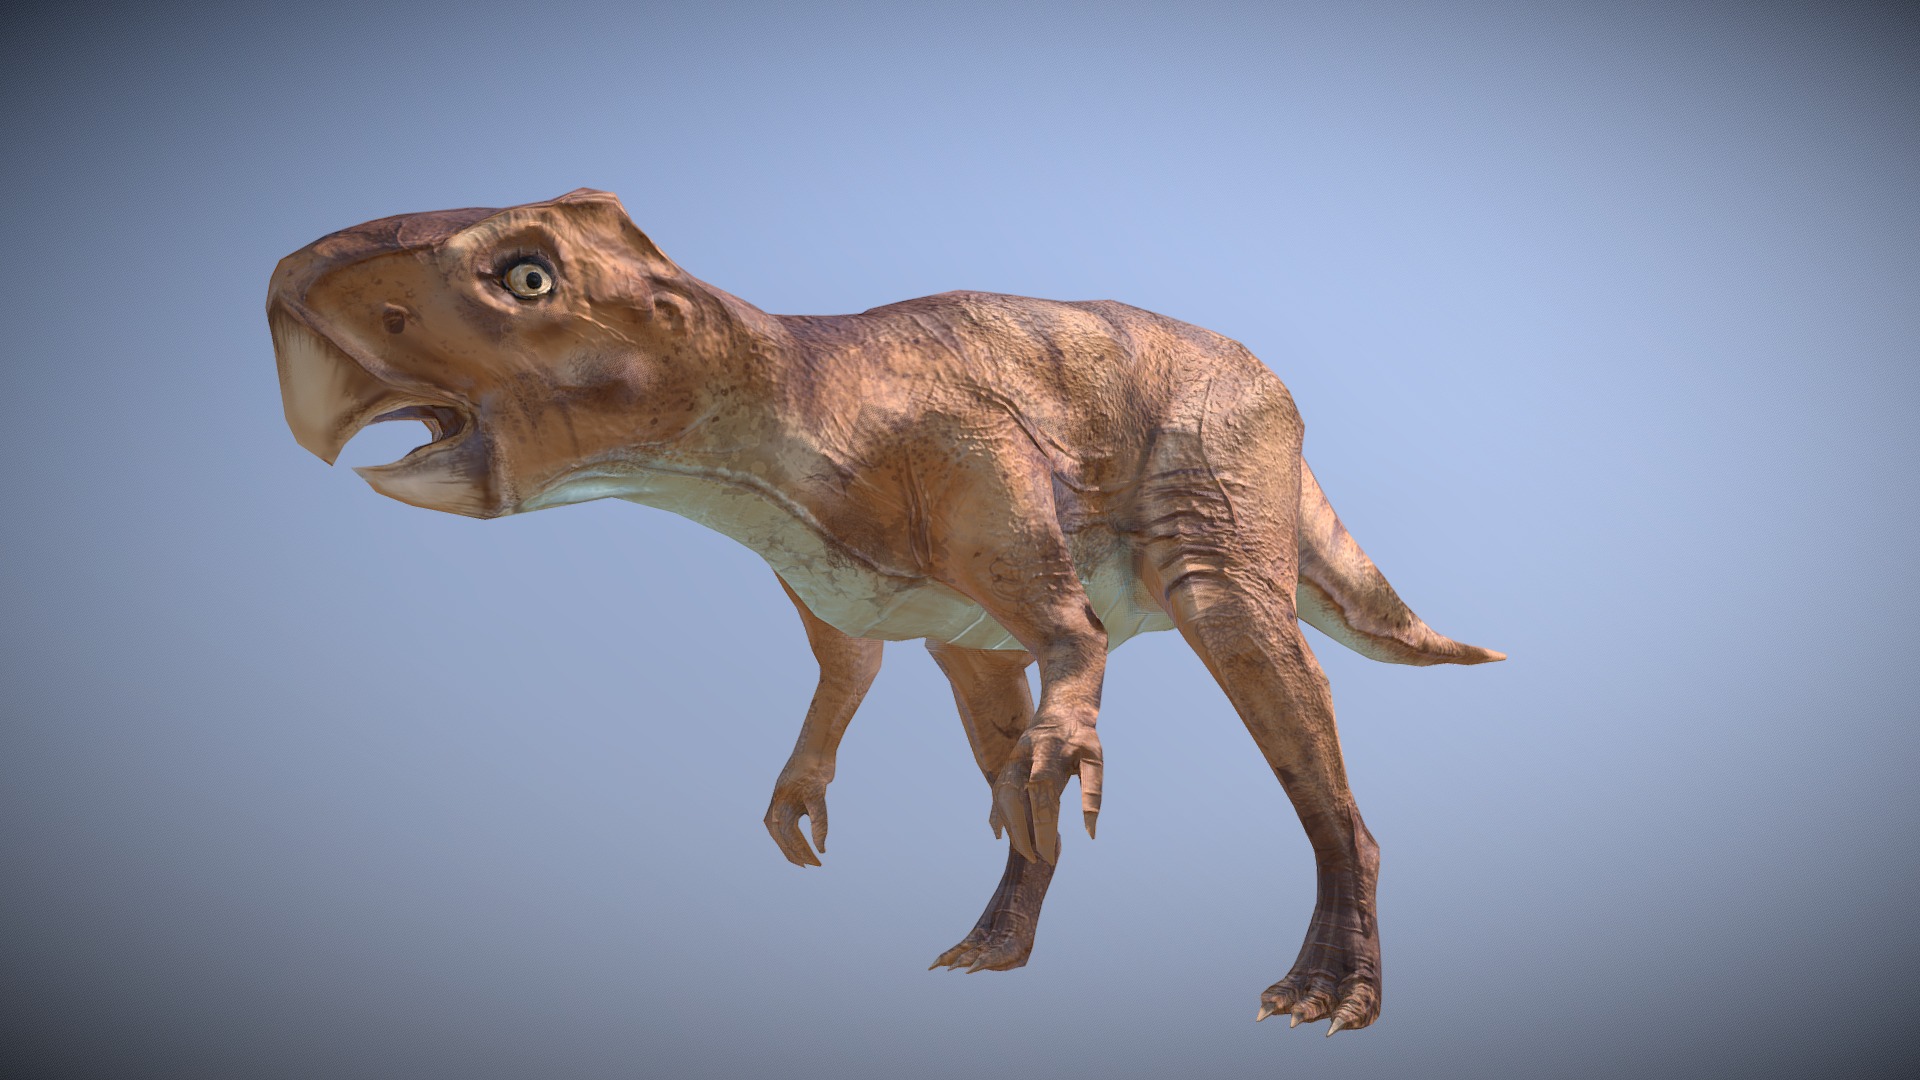 3D model Thai Dinosaur Psittacosaurus - This is a 3D model of the Thai Dinosaur Psittacosaurus. The 3D model is about a dinosaur with a blue background.